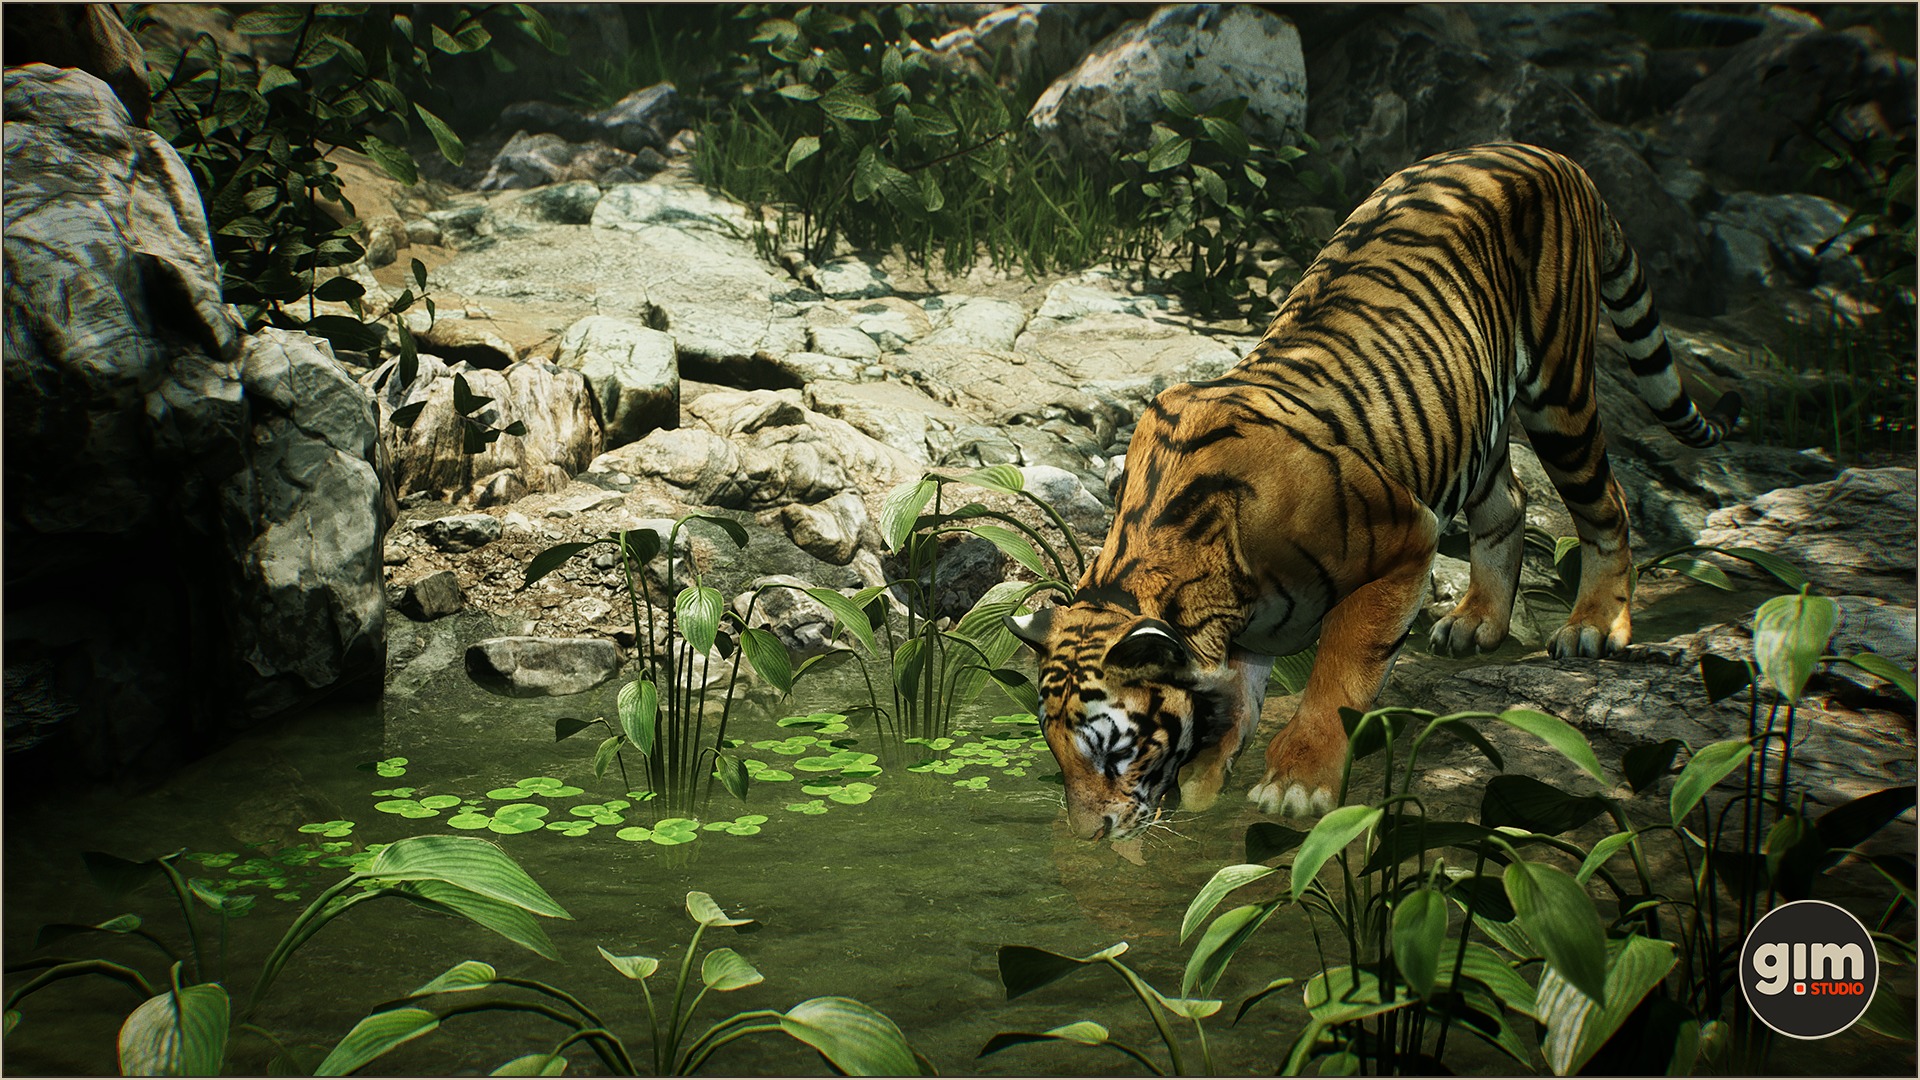 Male tiger quenching his thirst